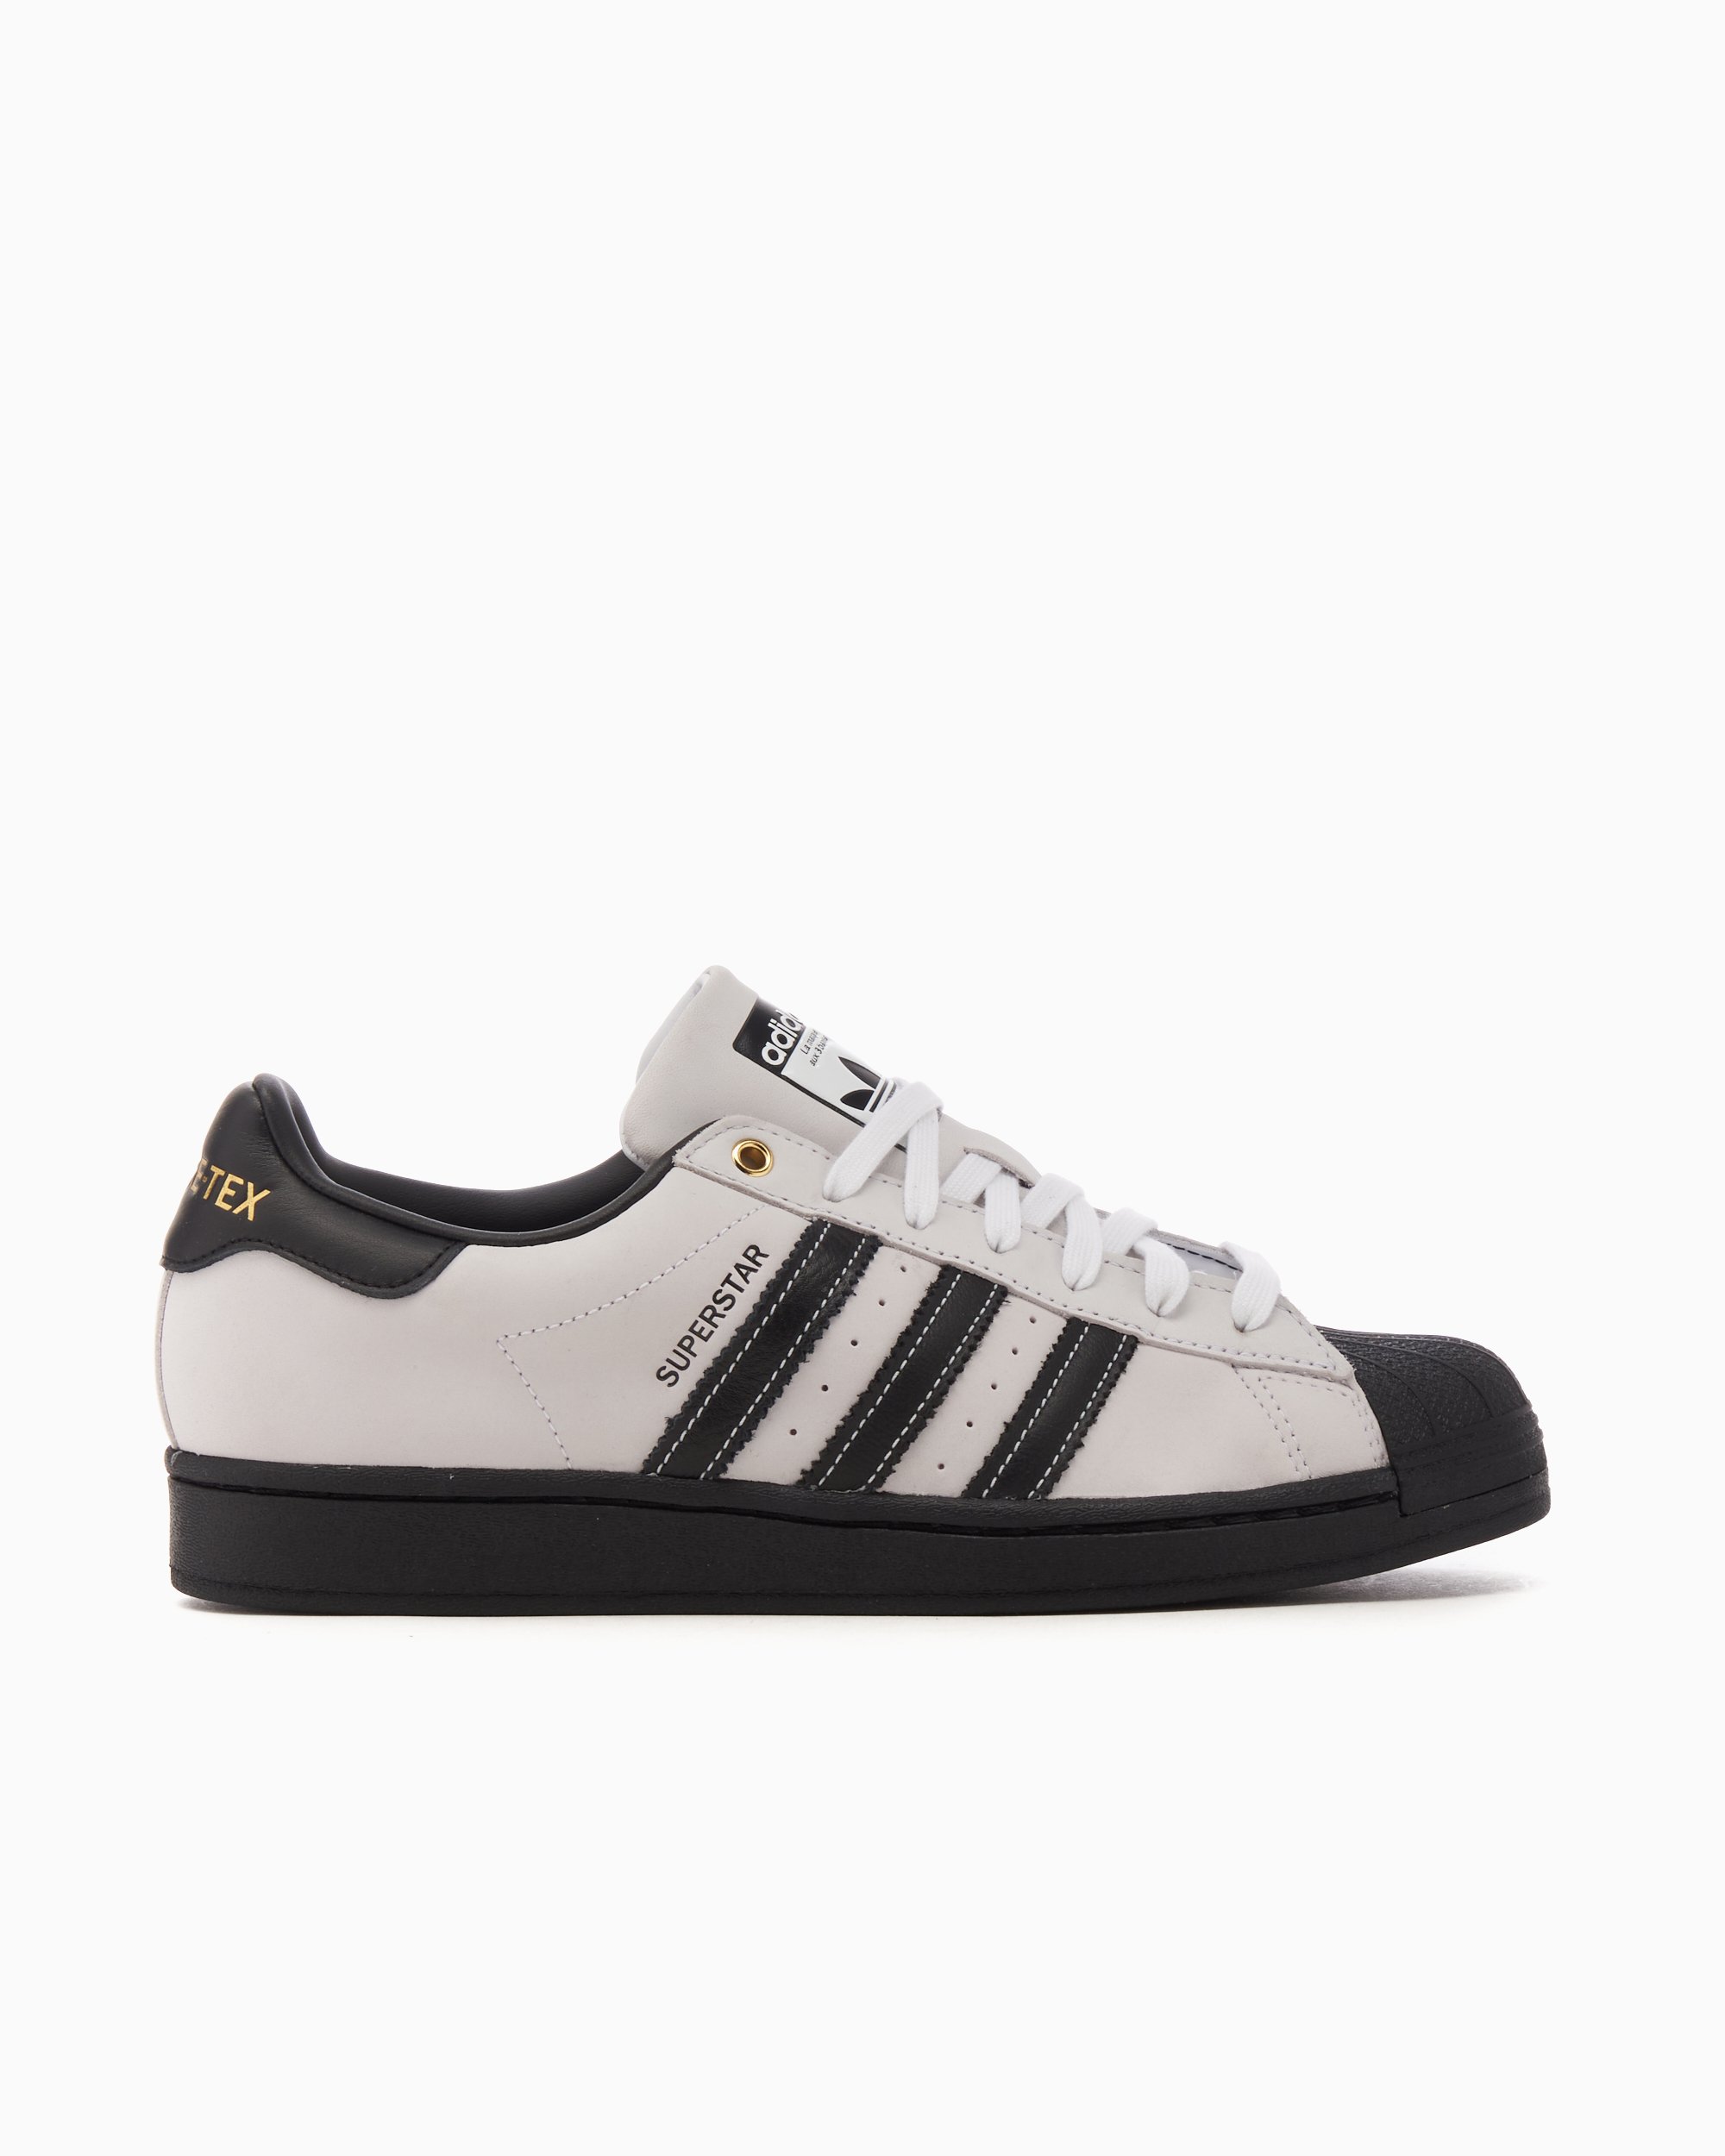 ADIDAS ORIGINALS Hand 2 leather-trimmed suede sneakers | NET-A-PORTER